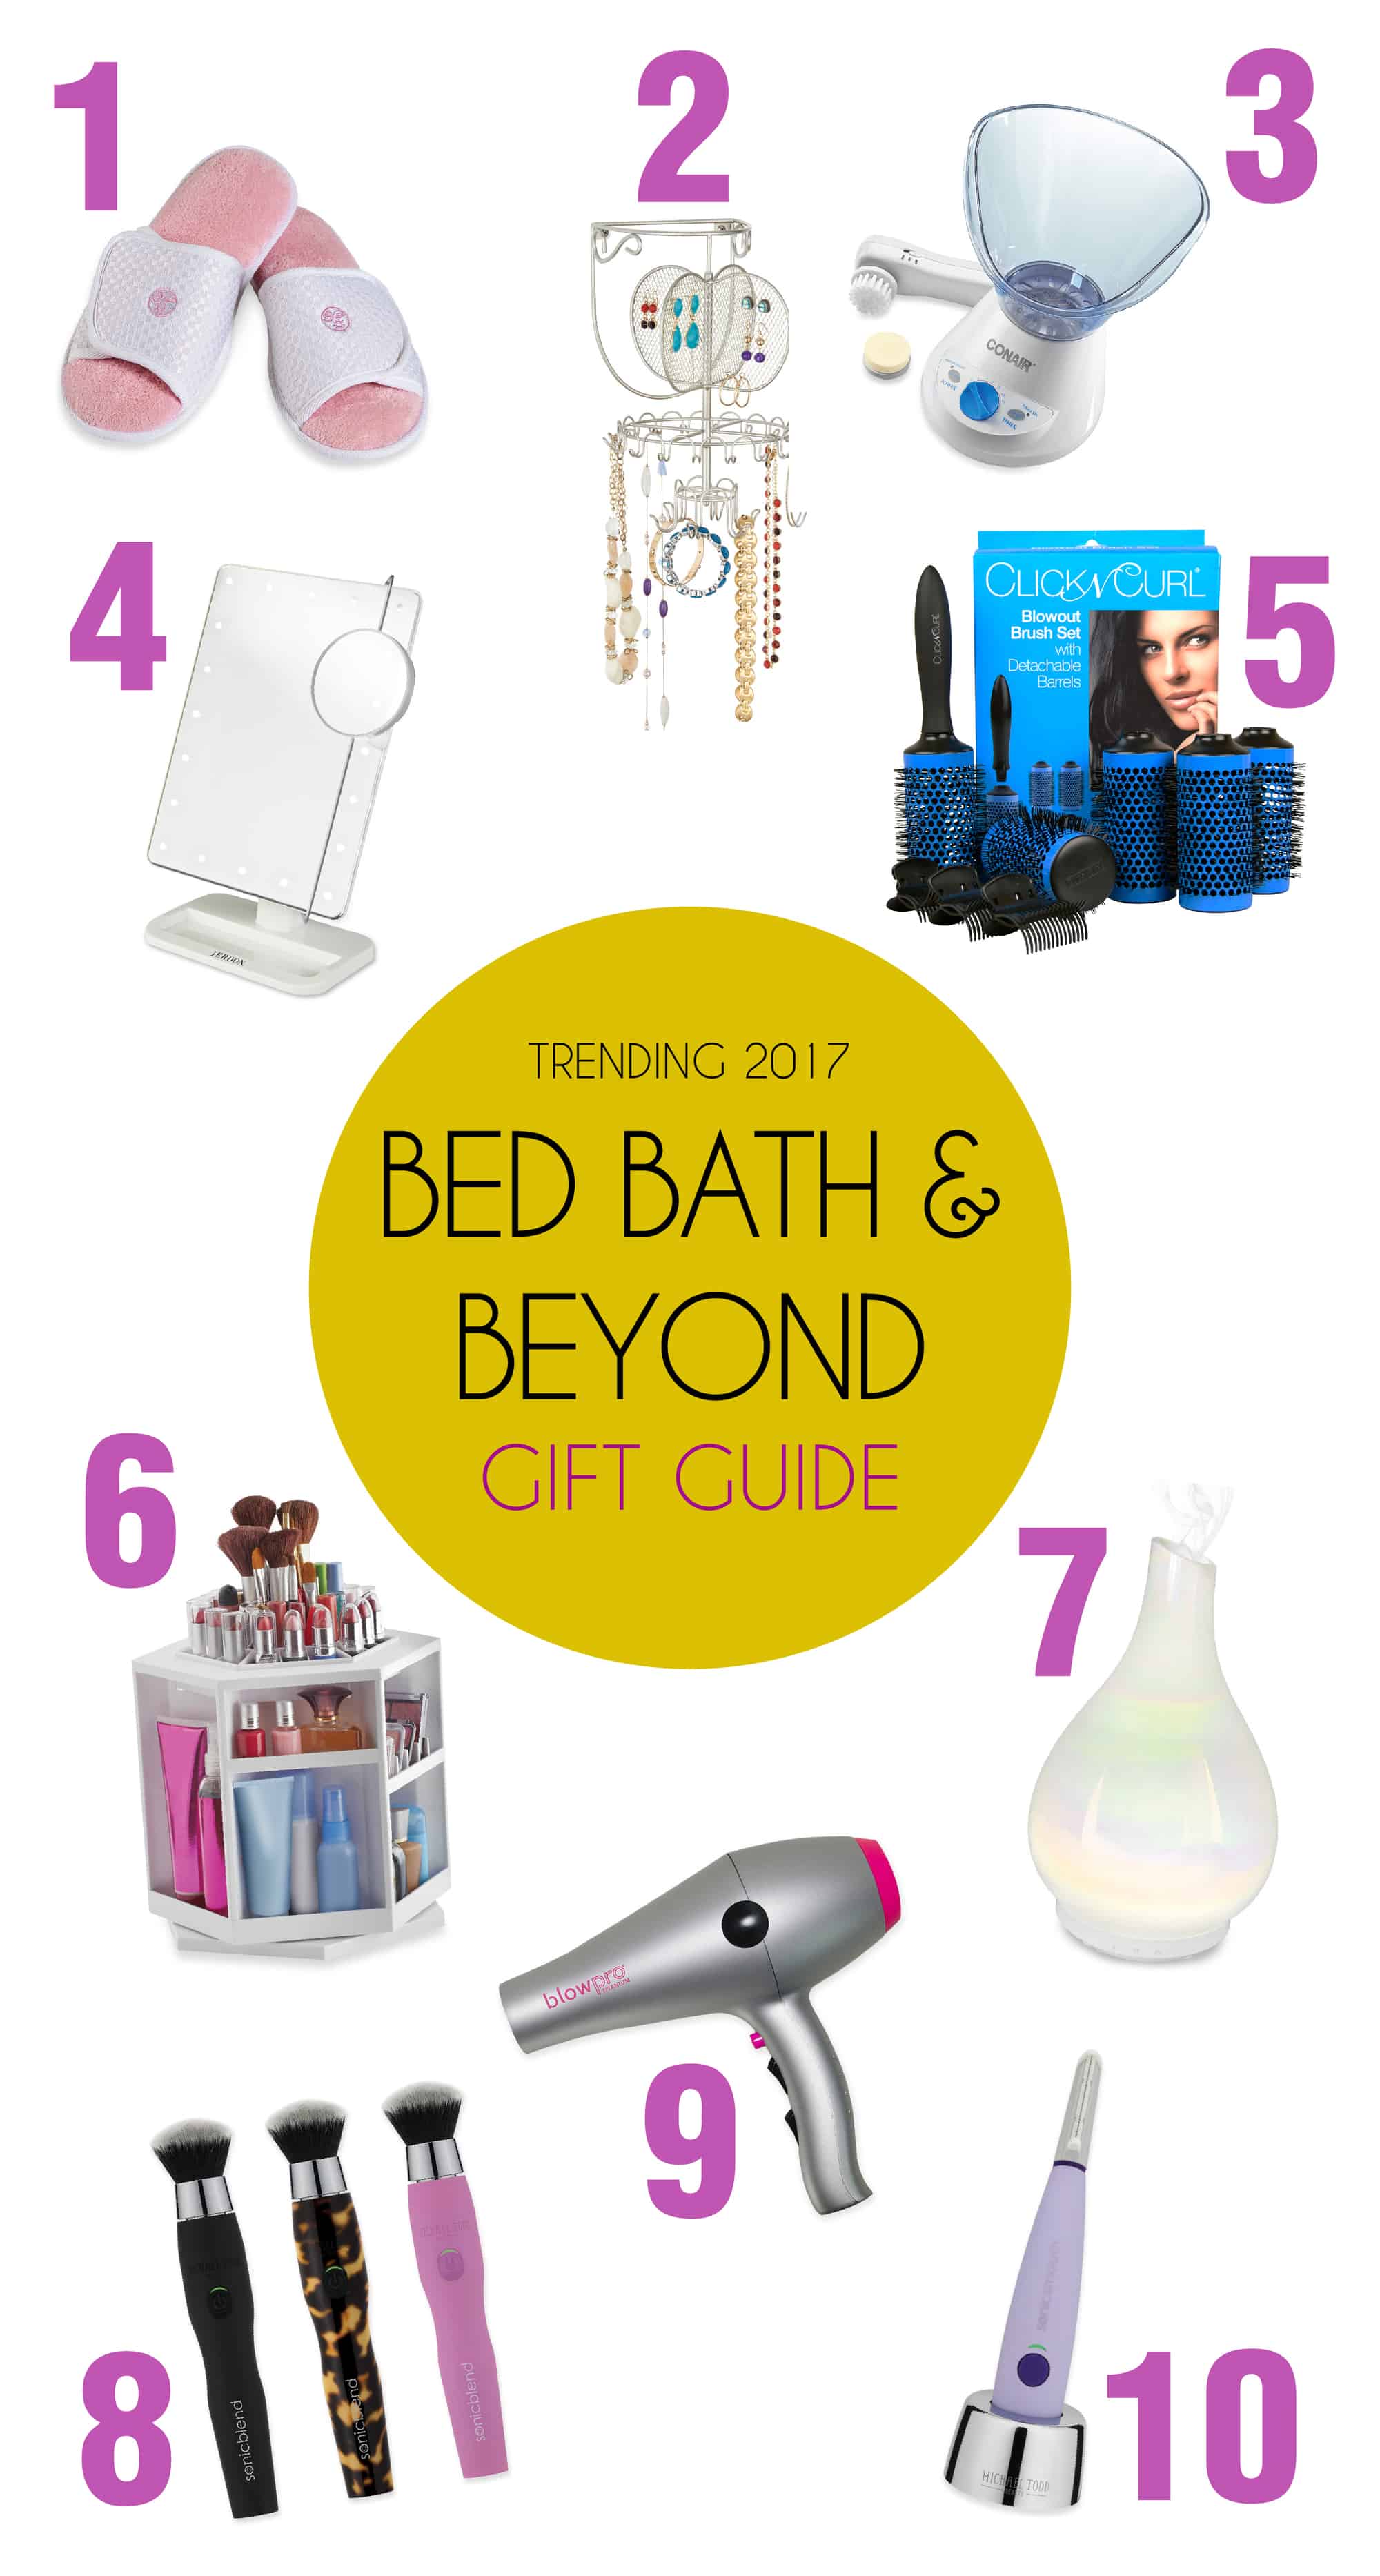 Graphic for "Trending 2017 Bed Bath and Beyond Gift Guide"